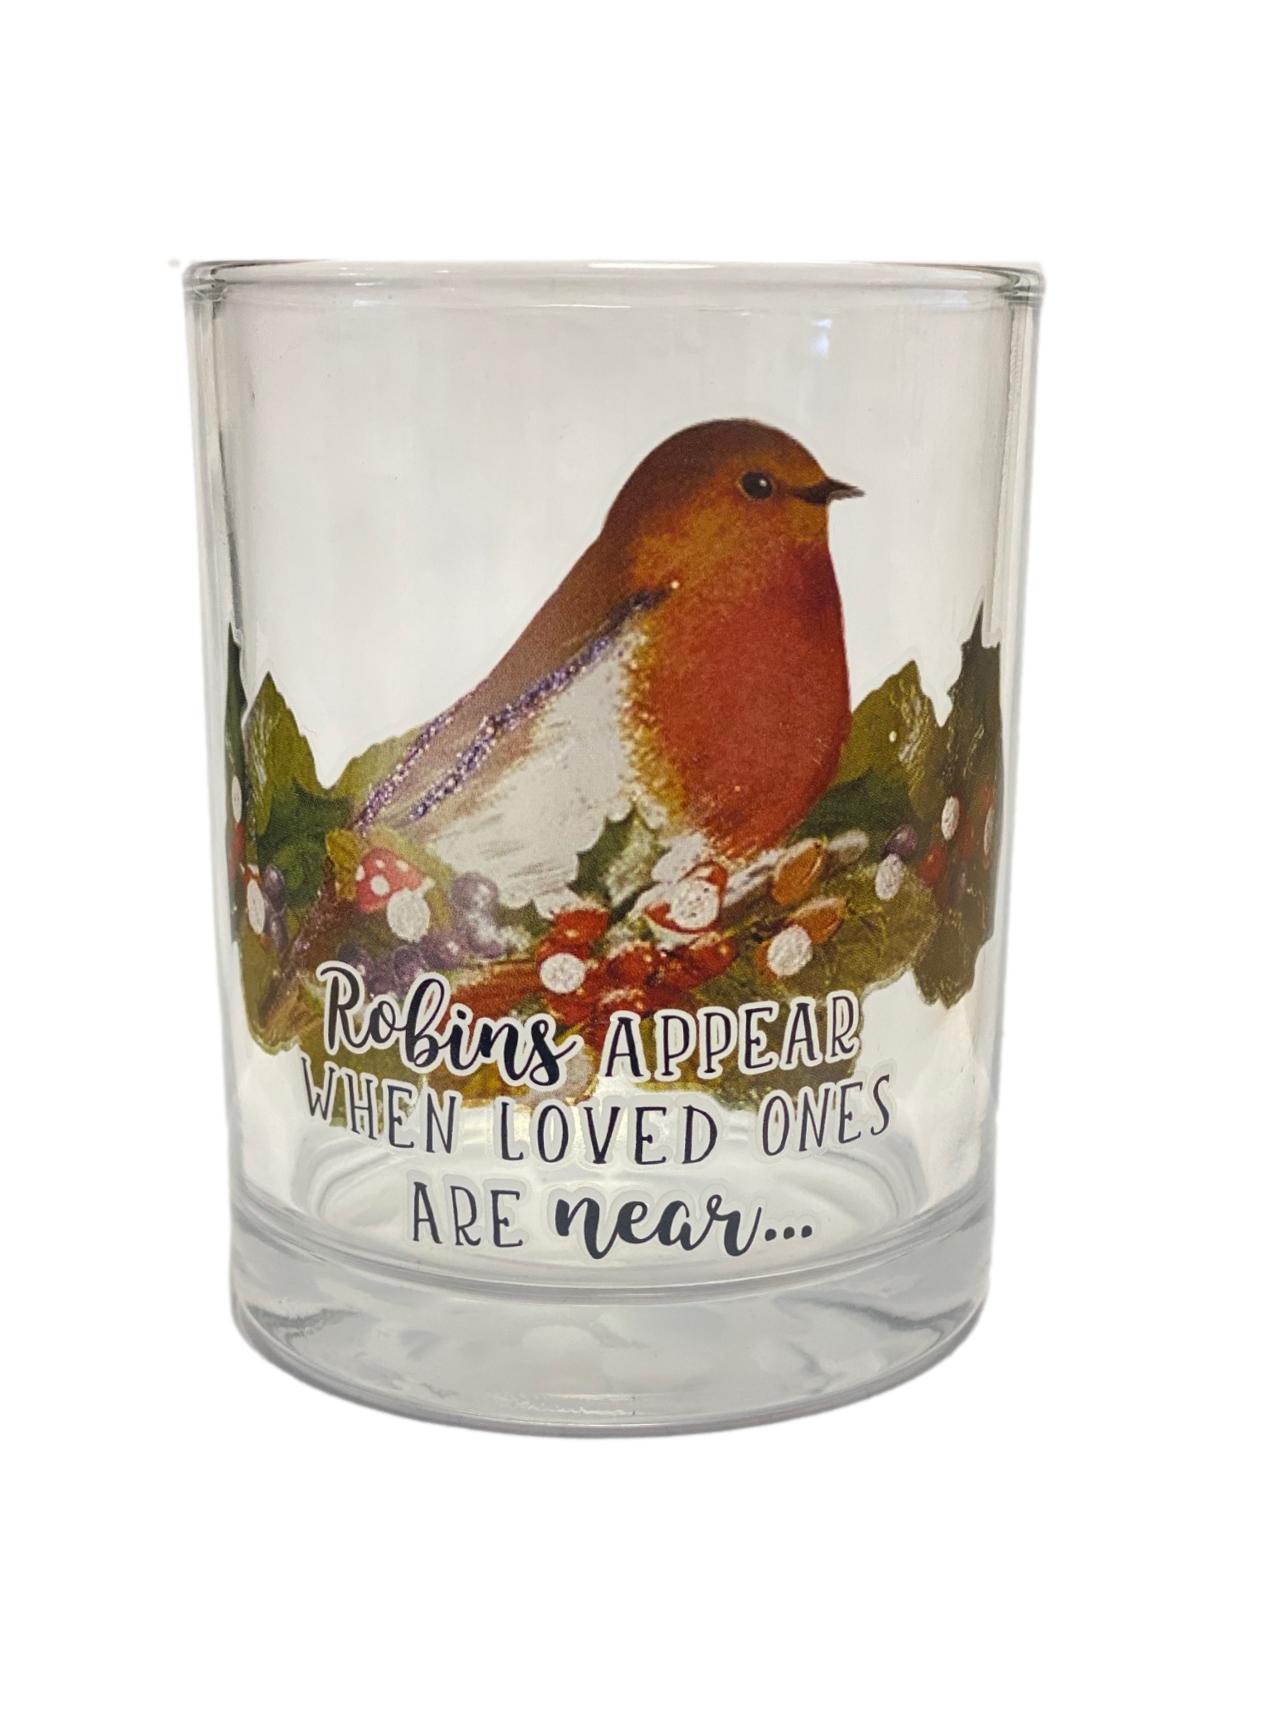 Heaven Sends Robins Appear When Loved Ones Are Near Christmas Candle Holder